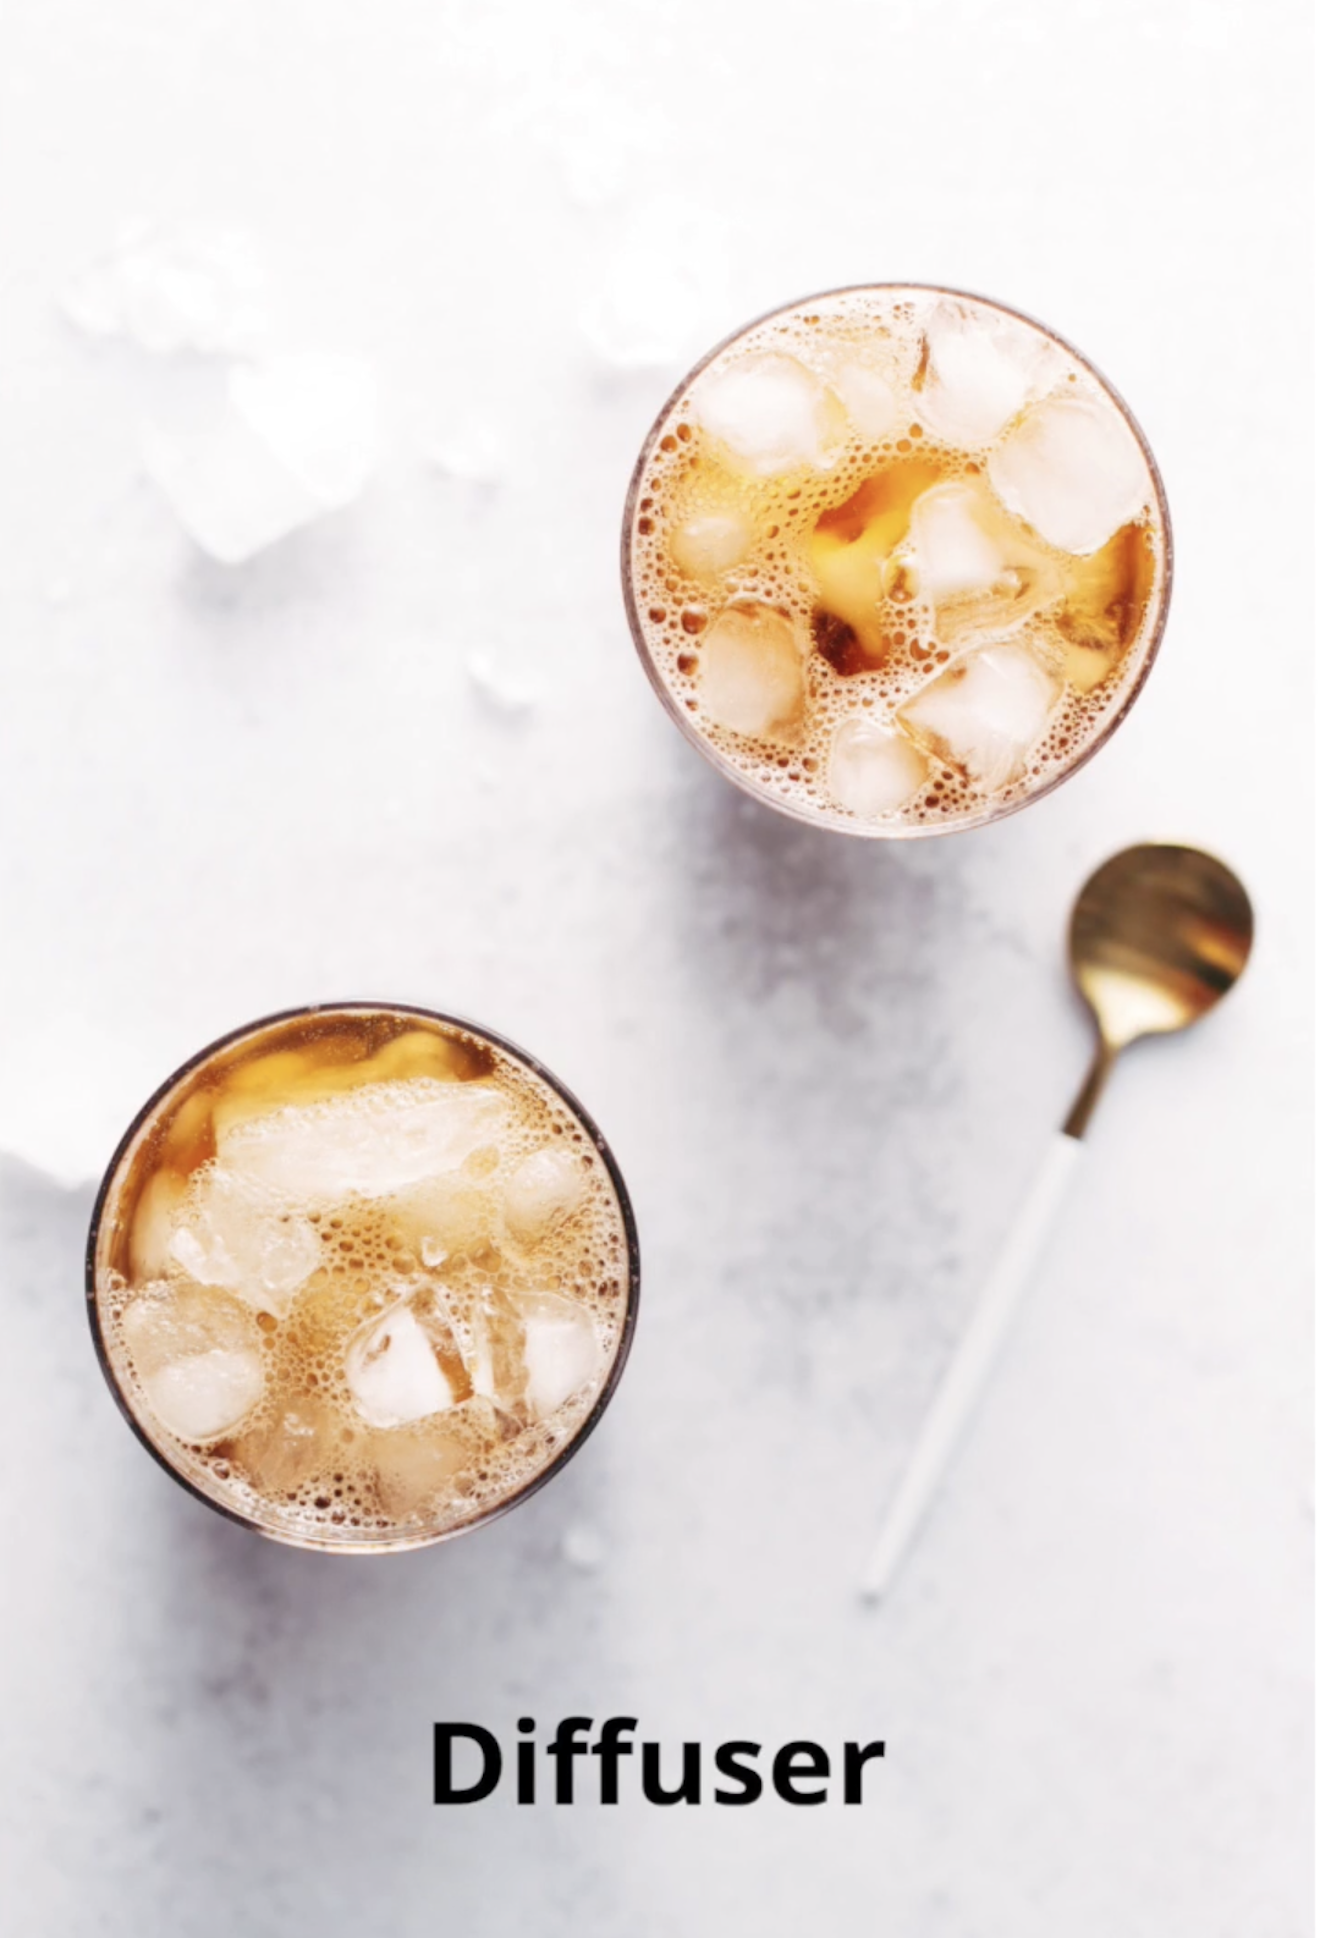 A photograph of two cups of iced coffee using a diffuser.